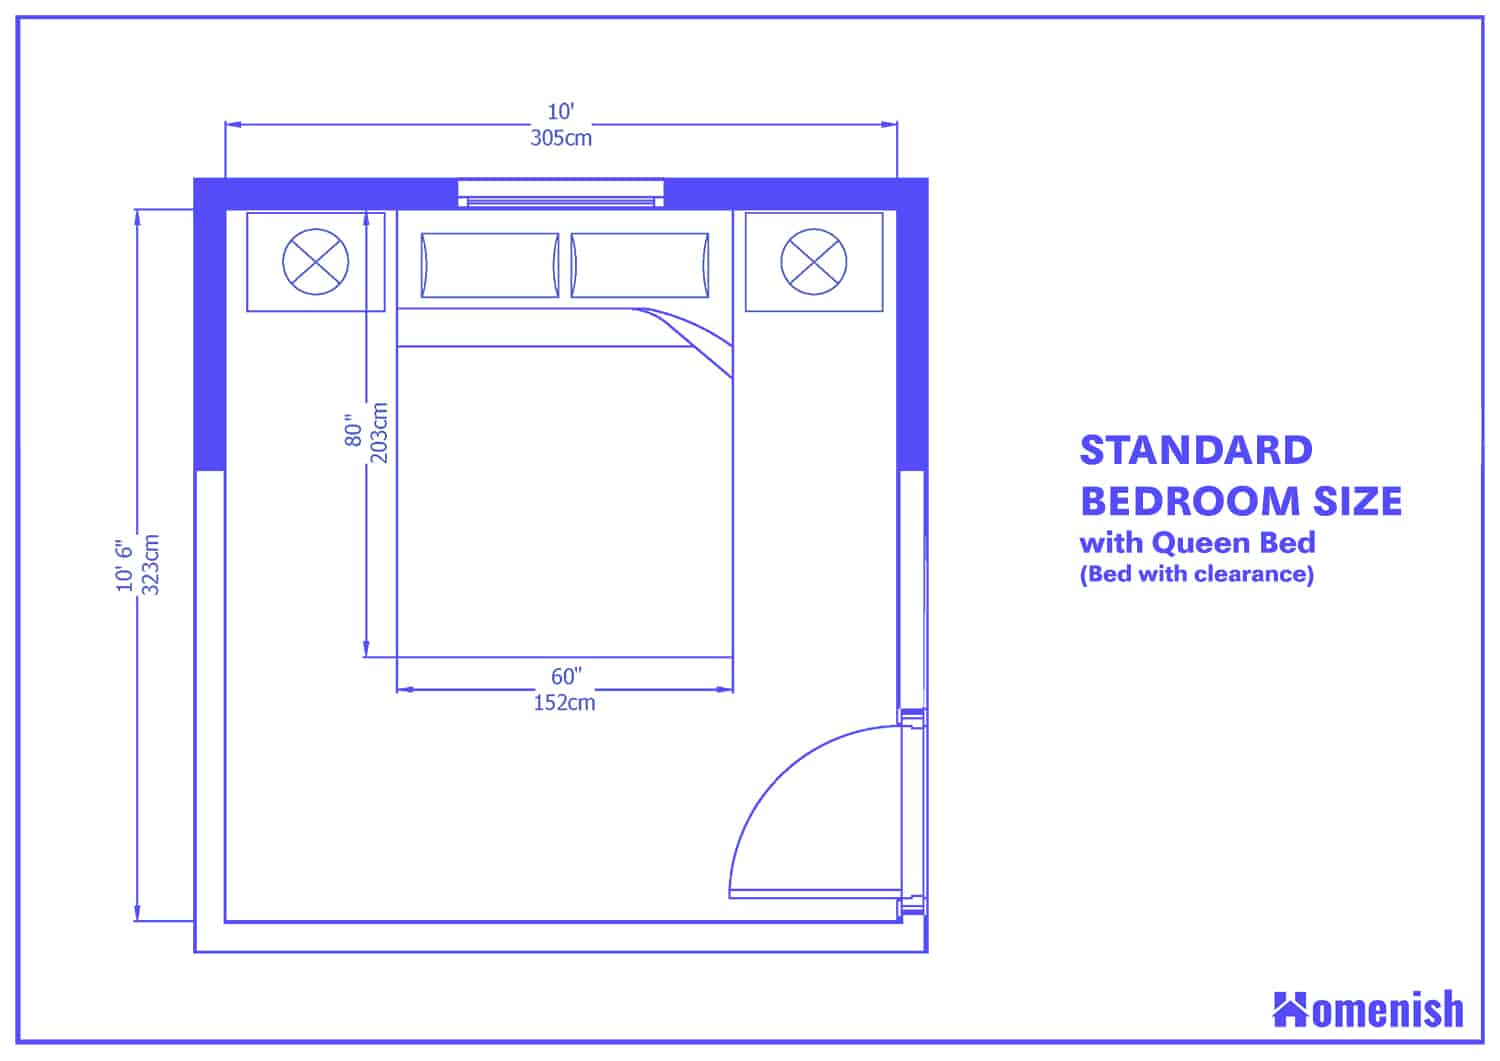 Average Bedroom Size And Layout Guide, Typical Size Of King Size Bed